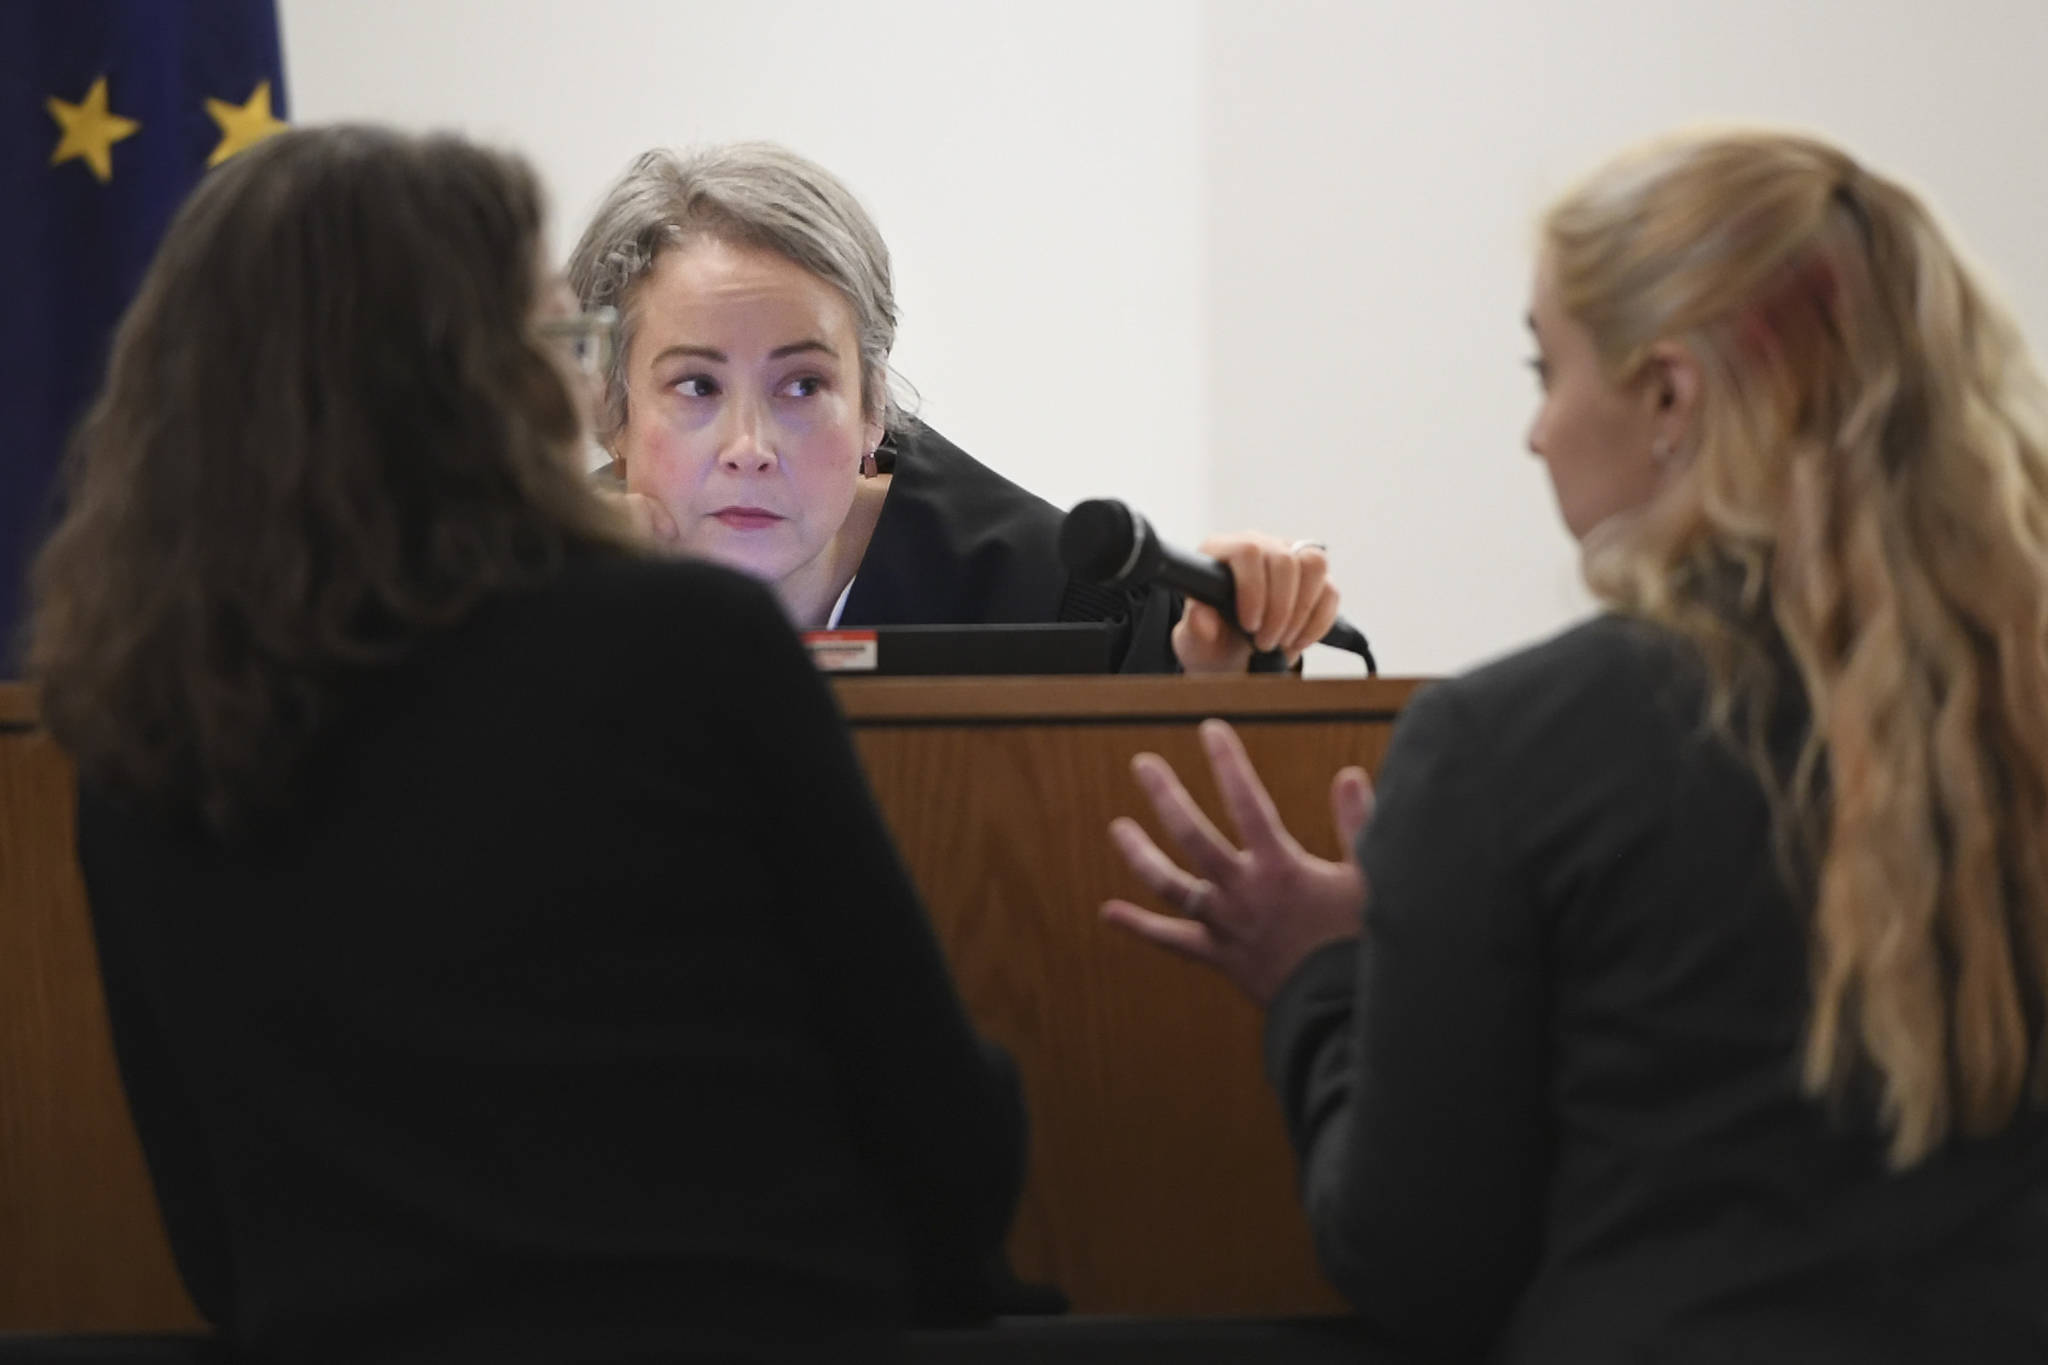 Juneau Superior Court Judge Amy Mead, center, listens to Assistant Attorney General Lisa Kelley, right, and Public Defender Agency’s Deborah Macaulay during the trial of Loretto Lee Jones in Juneau Superior Court on Thursday, Oct. 31, 2019. Jones is on trial for Alaska Permanent Fund Dividend felony theft and fraud. The two charges stem from allegations that Jones filed for her PFD payout in 2016 while having resided outside the state for more than 180 days. (Michael Penn | Juneau Empire)